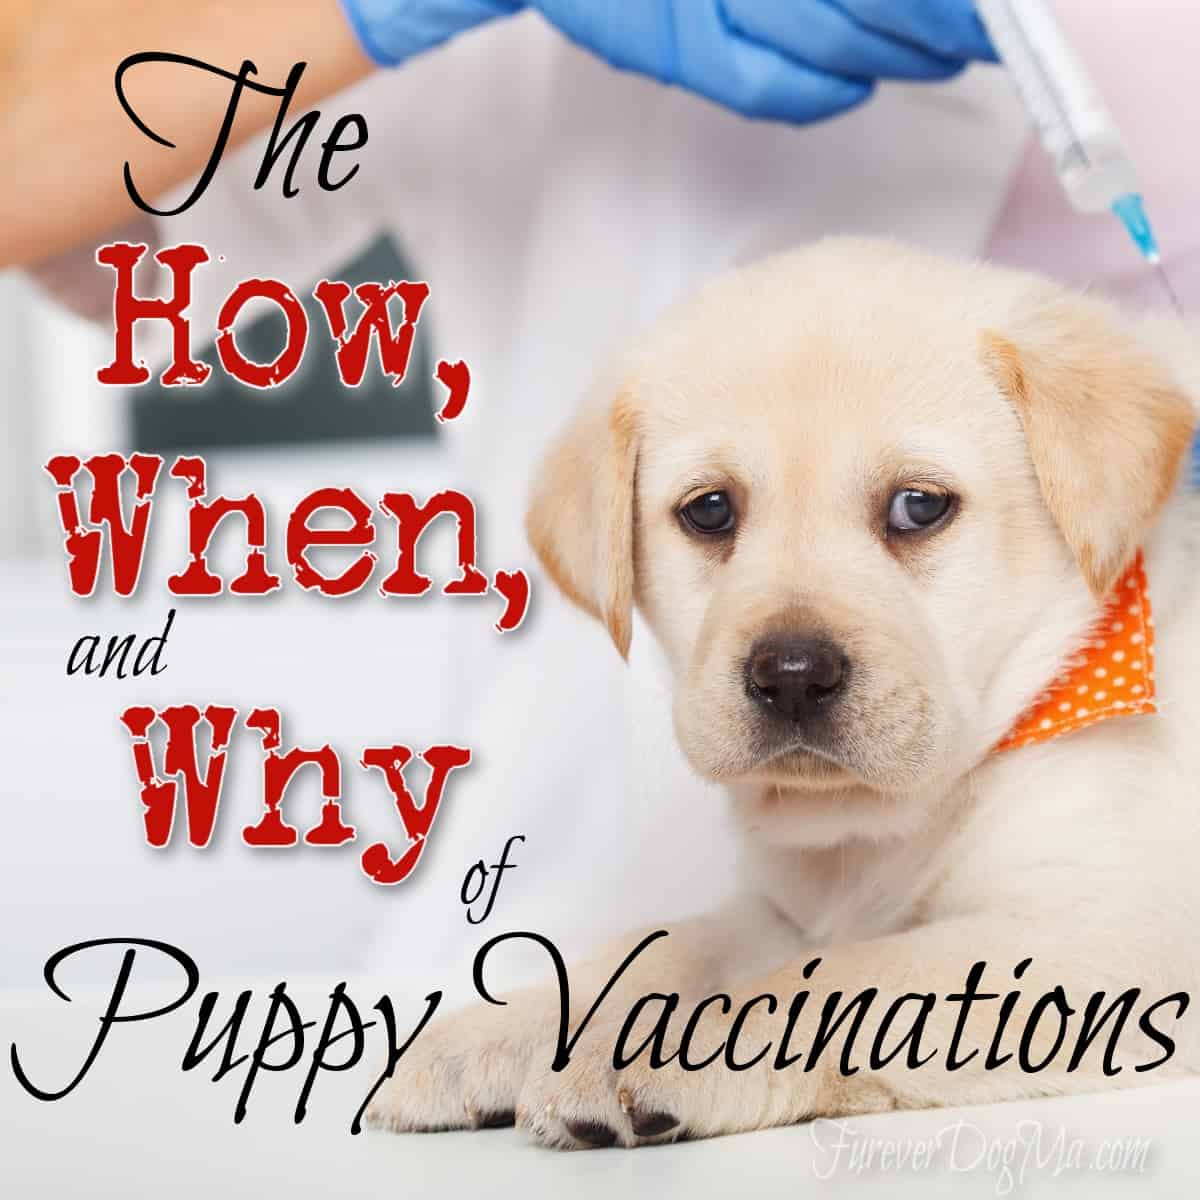 Puppy Vaccinations cover photo